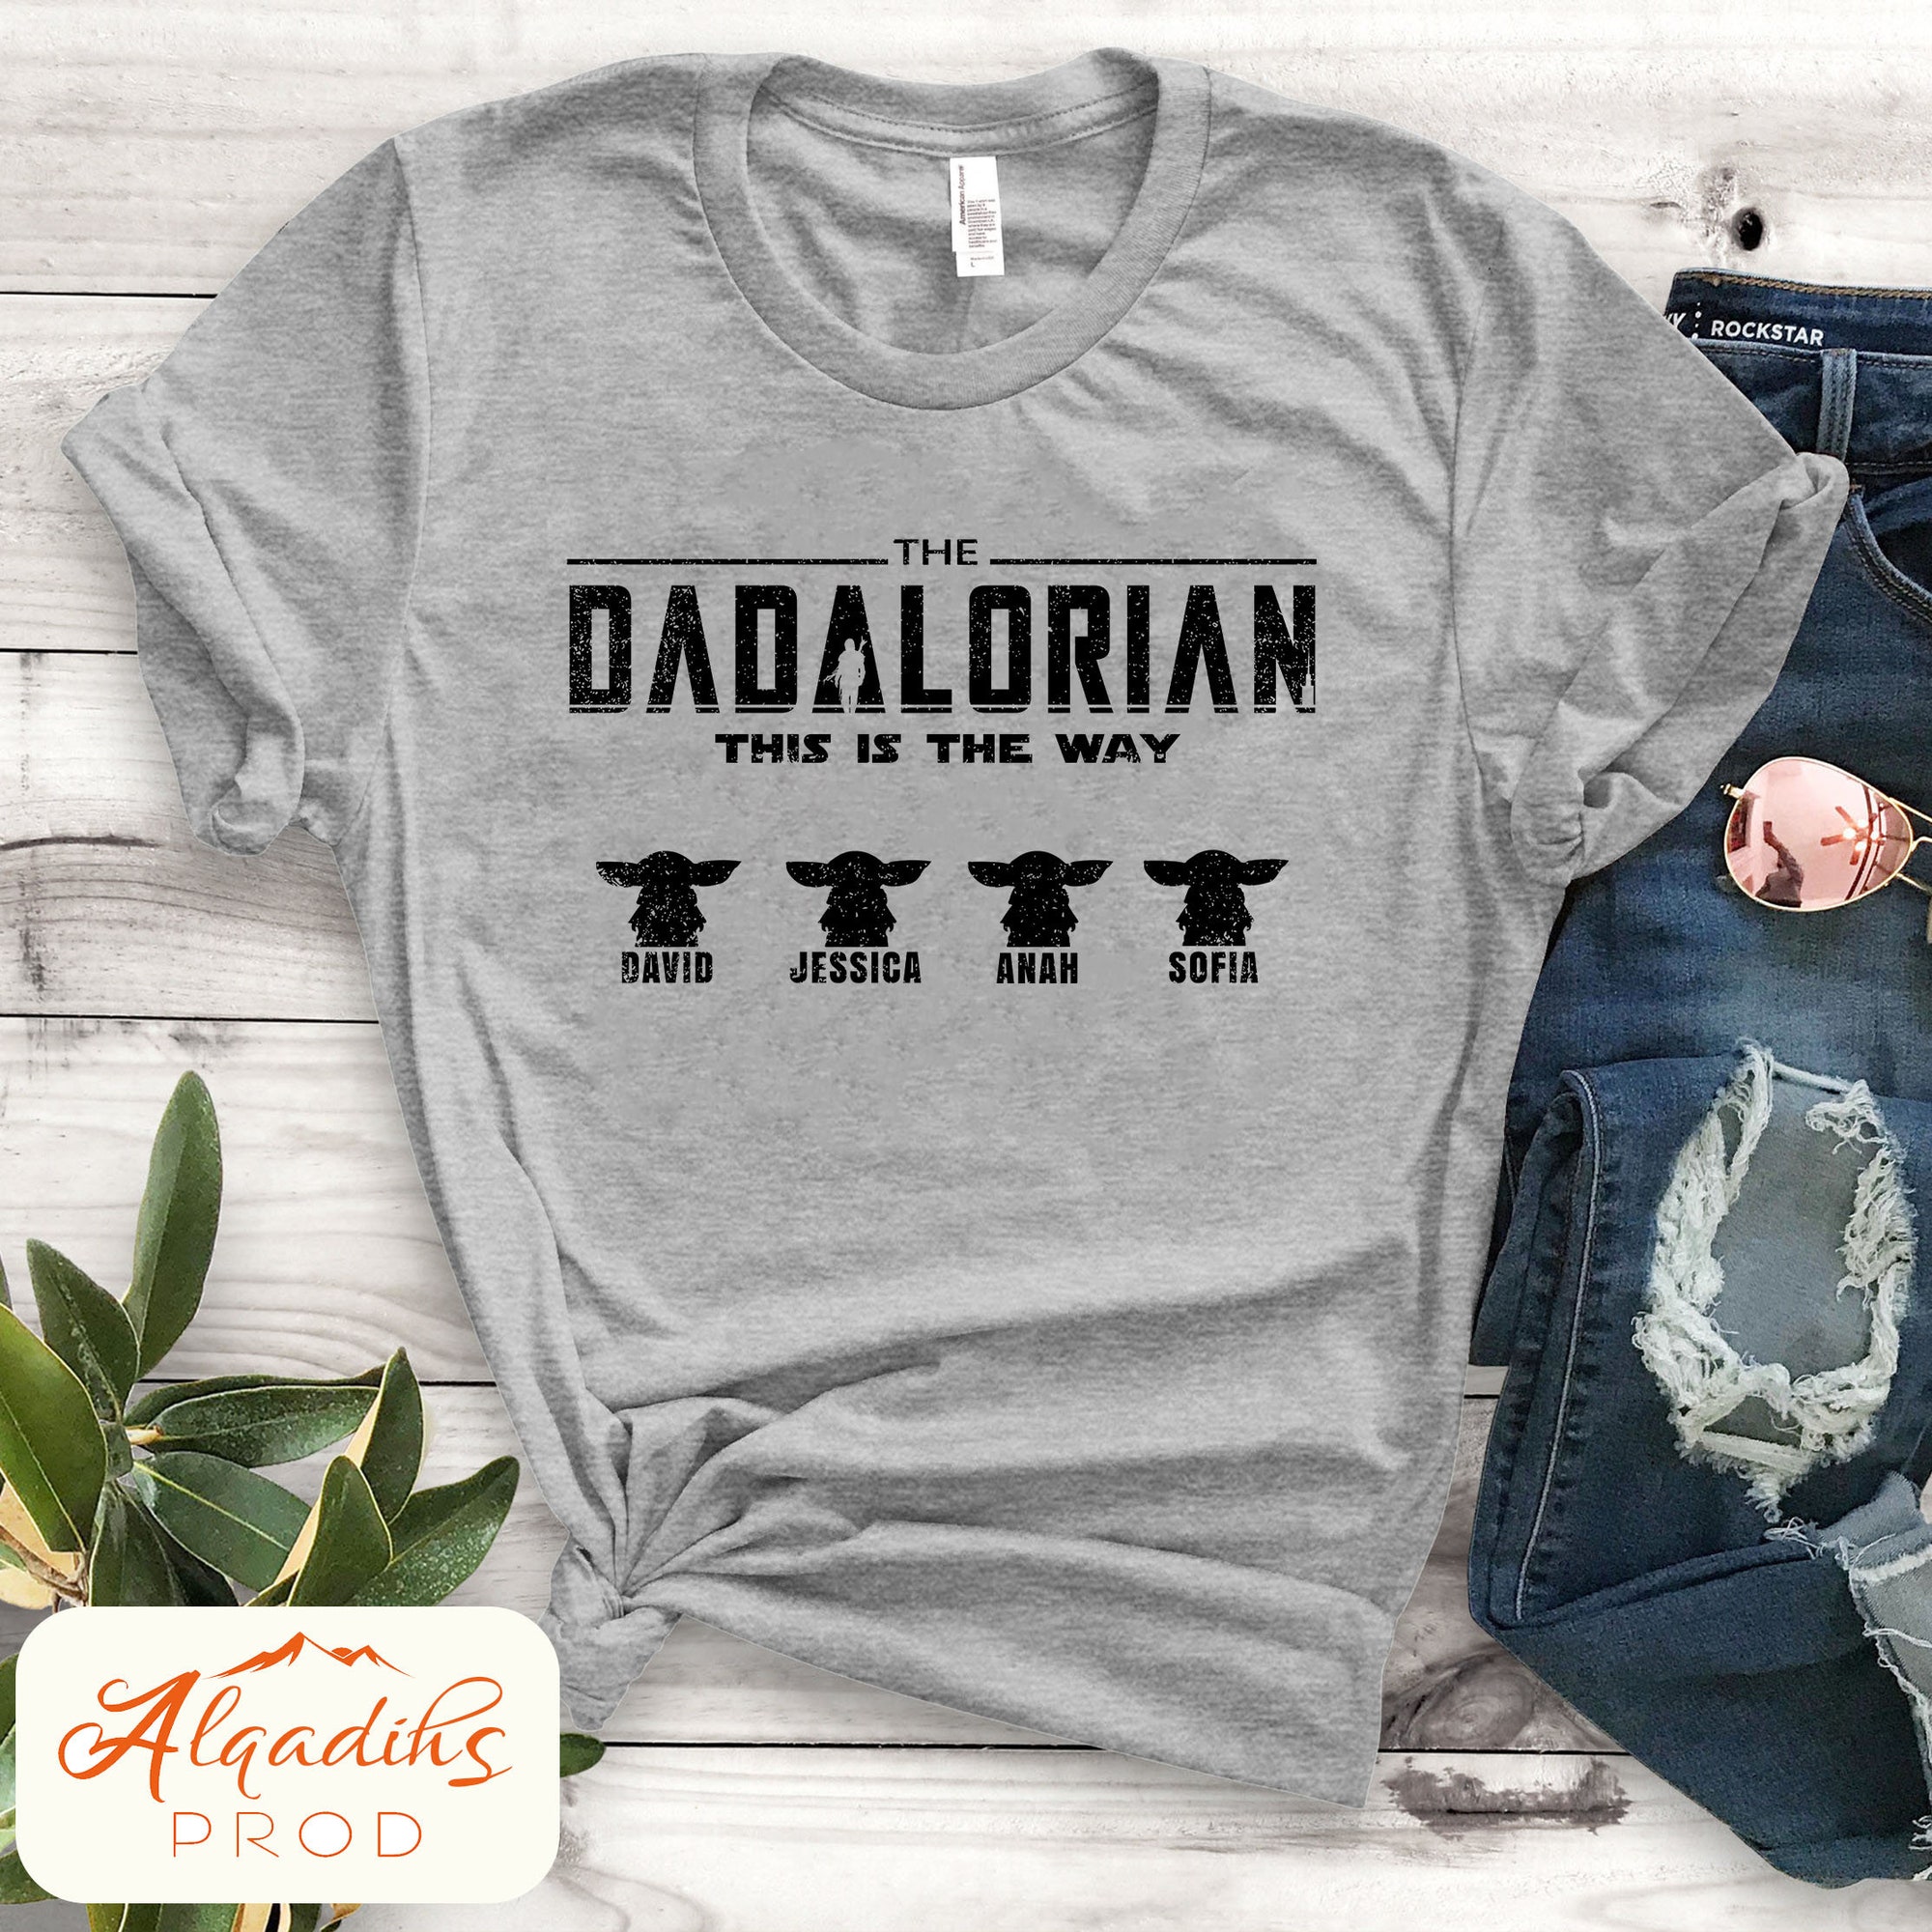 Discover The Dadalorian Shirt, Customized Dad Shirt With kids Name, Father's day 2022 gift Idea, Personalized Daddy T-shirt, Custom dad For Dad Birth